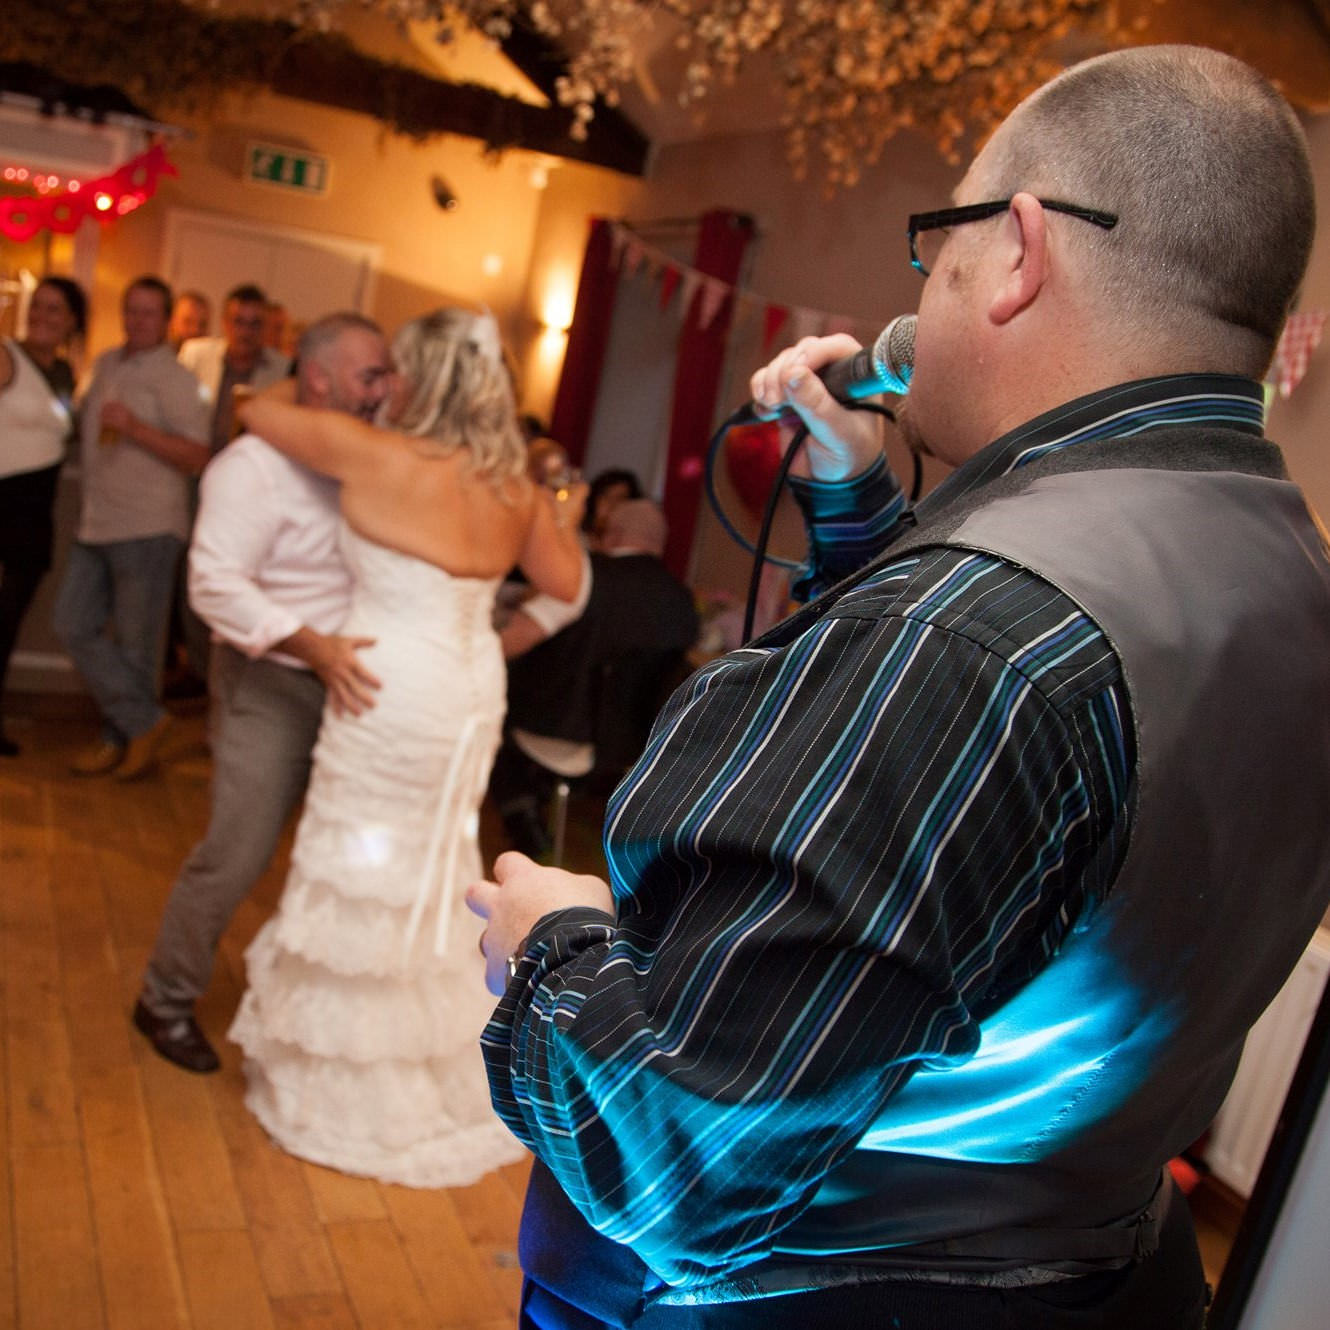 Jon paul wedding singer Bristol in profile and singing to newlywed couple embraced in their live first dance.